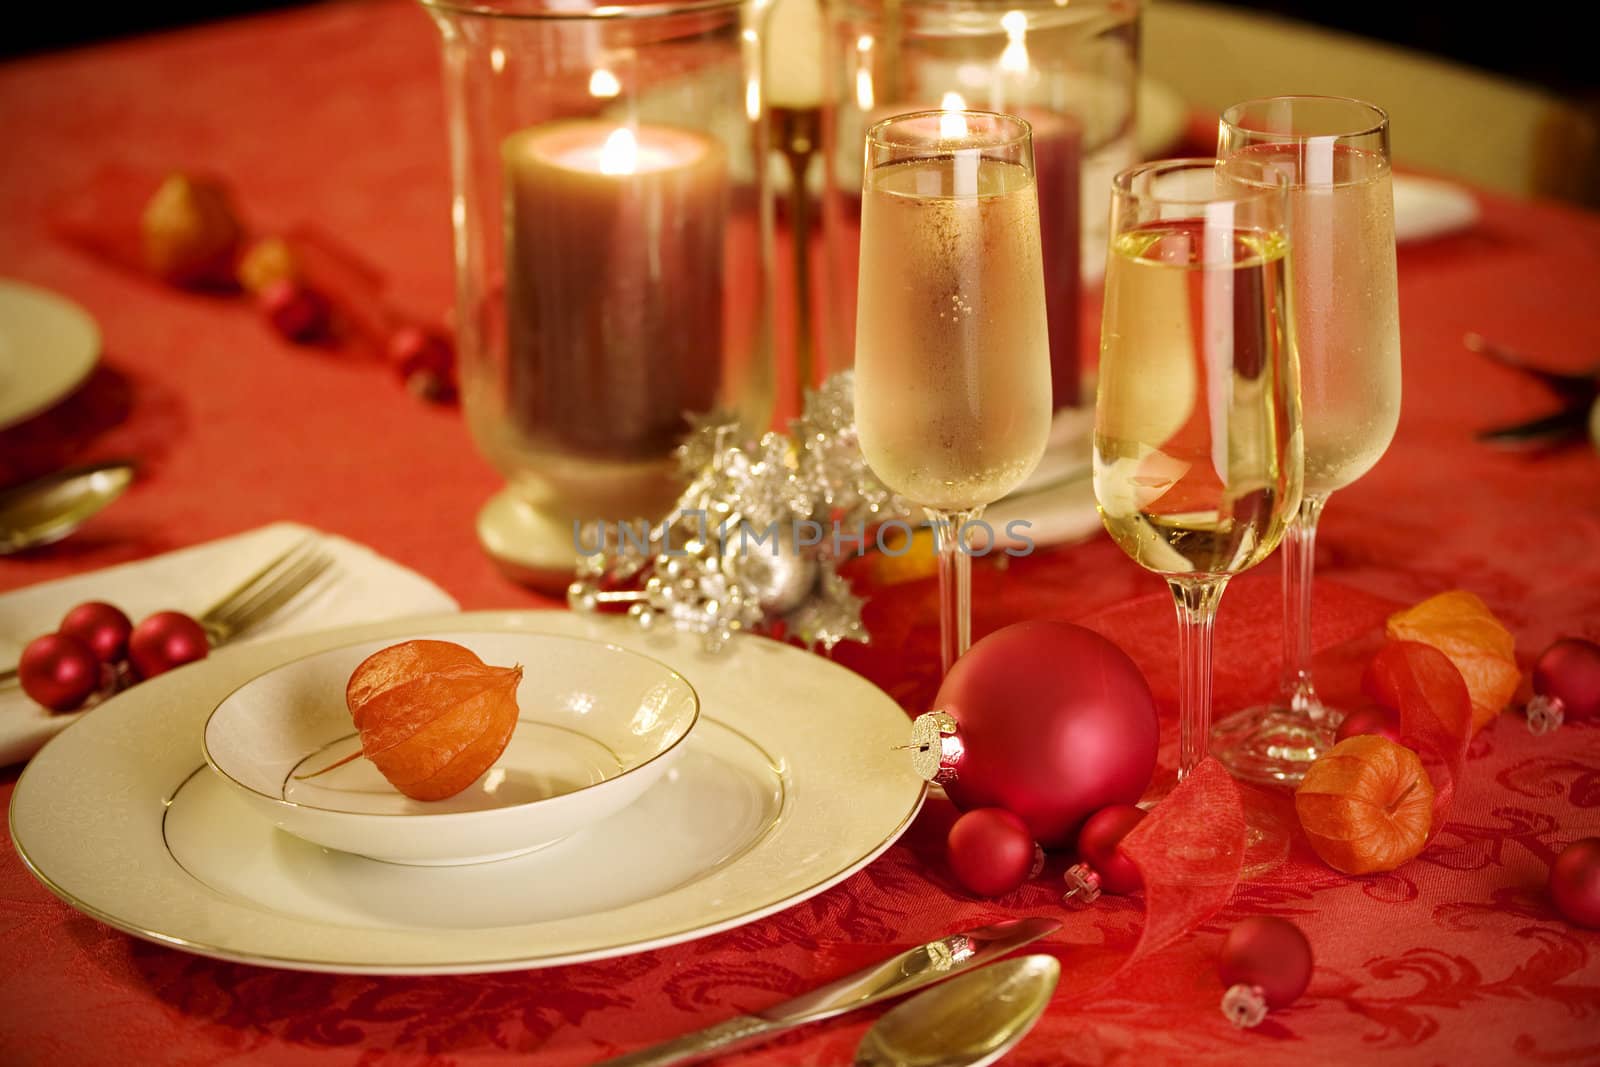 Elegant Christmas table setting in red and gold colors by jarenwicklund